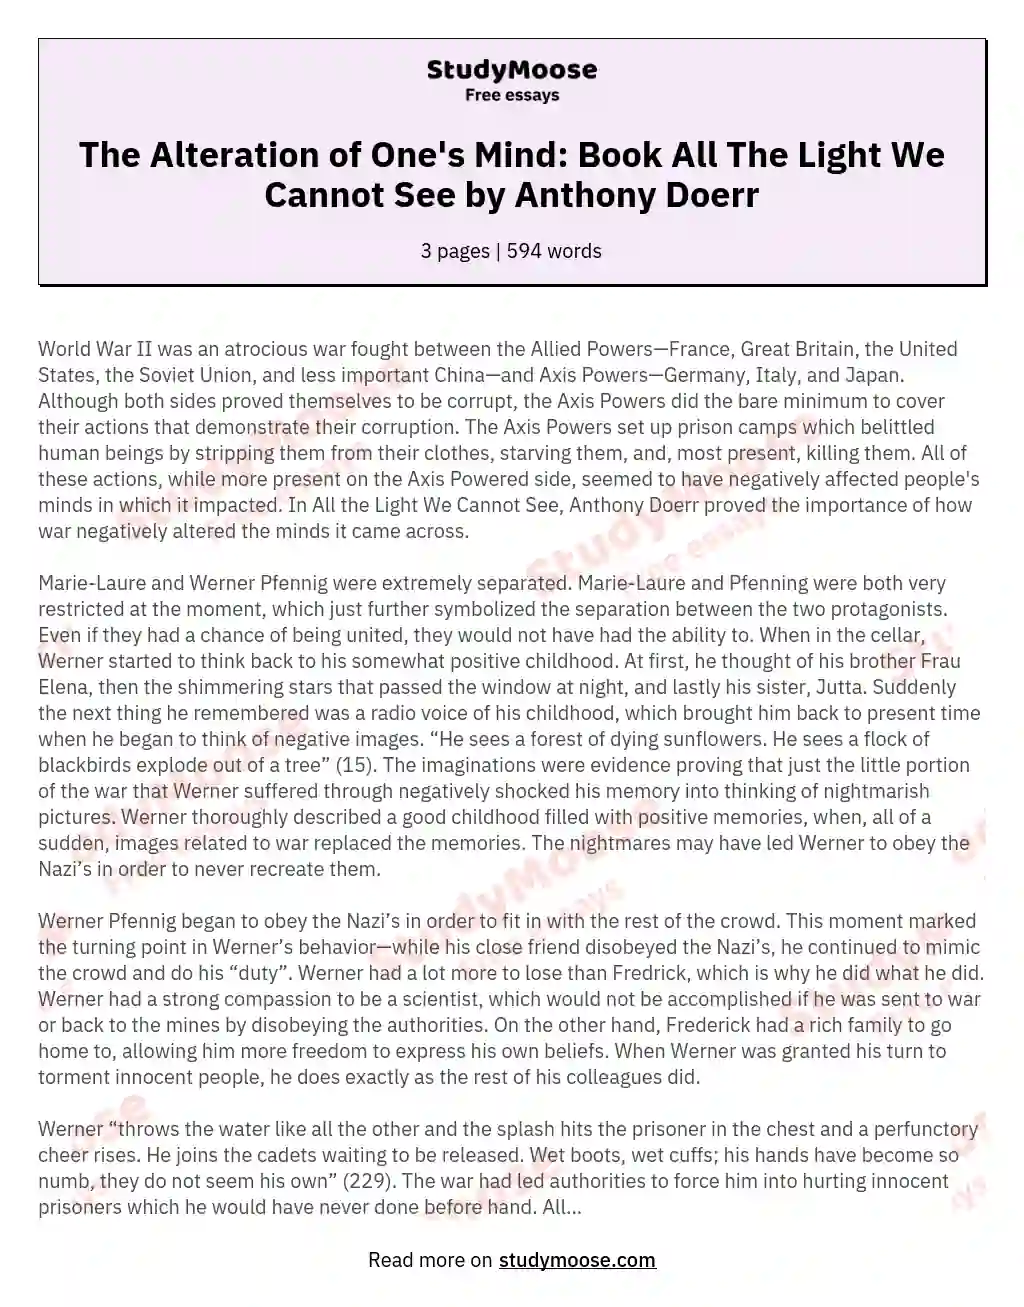 The Alteration of One's Mind: Book All The Light We Cannot See by Anthony Doerr essay